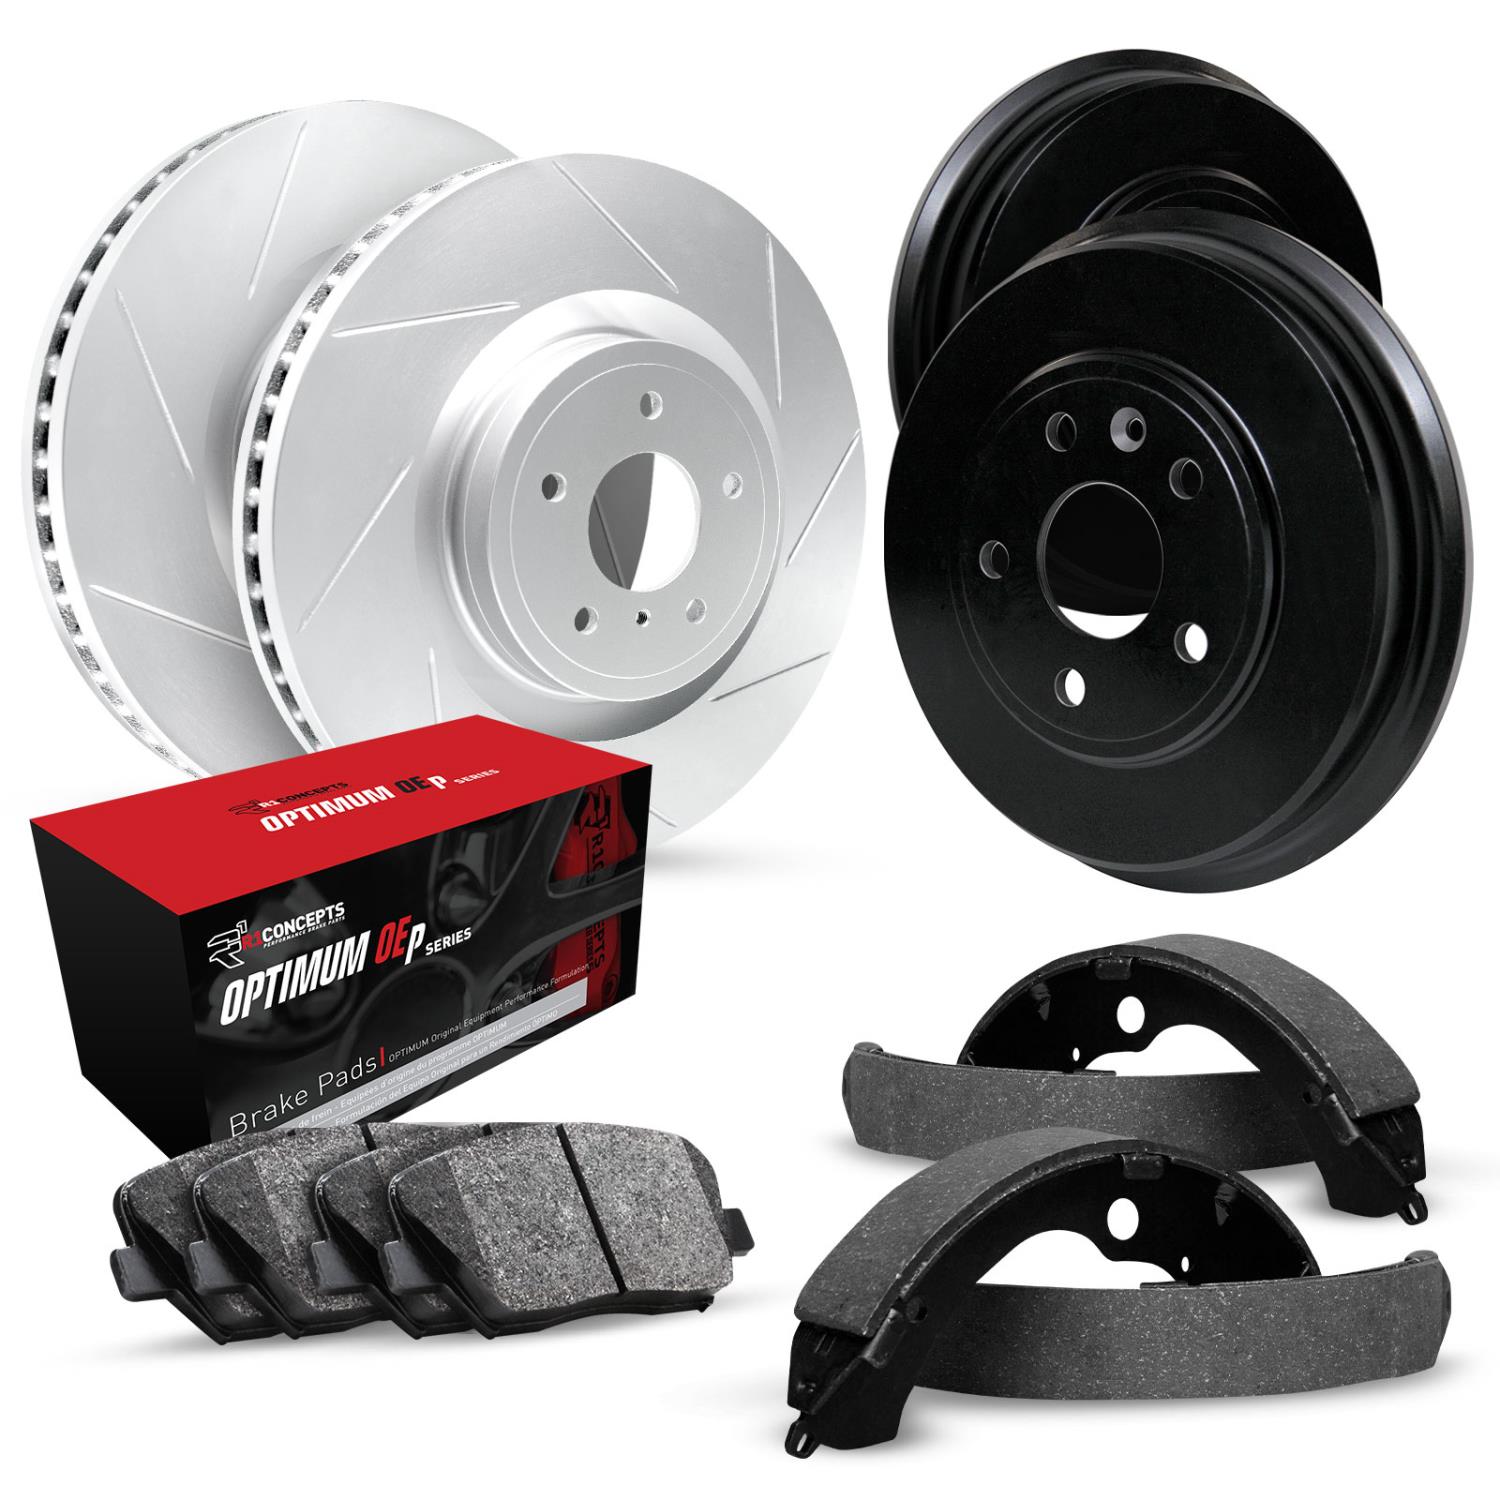 GEO-Carbon Slotted Brake Rotor & Drum Set w/Optimum OE Pads & Shoes, 2008-2015 GM, Position: Front & Rear